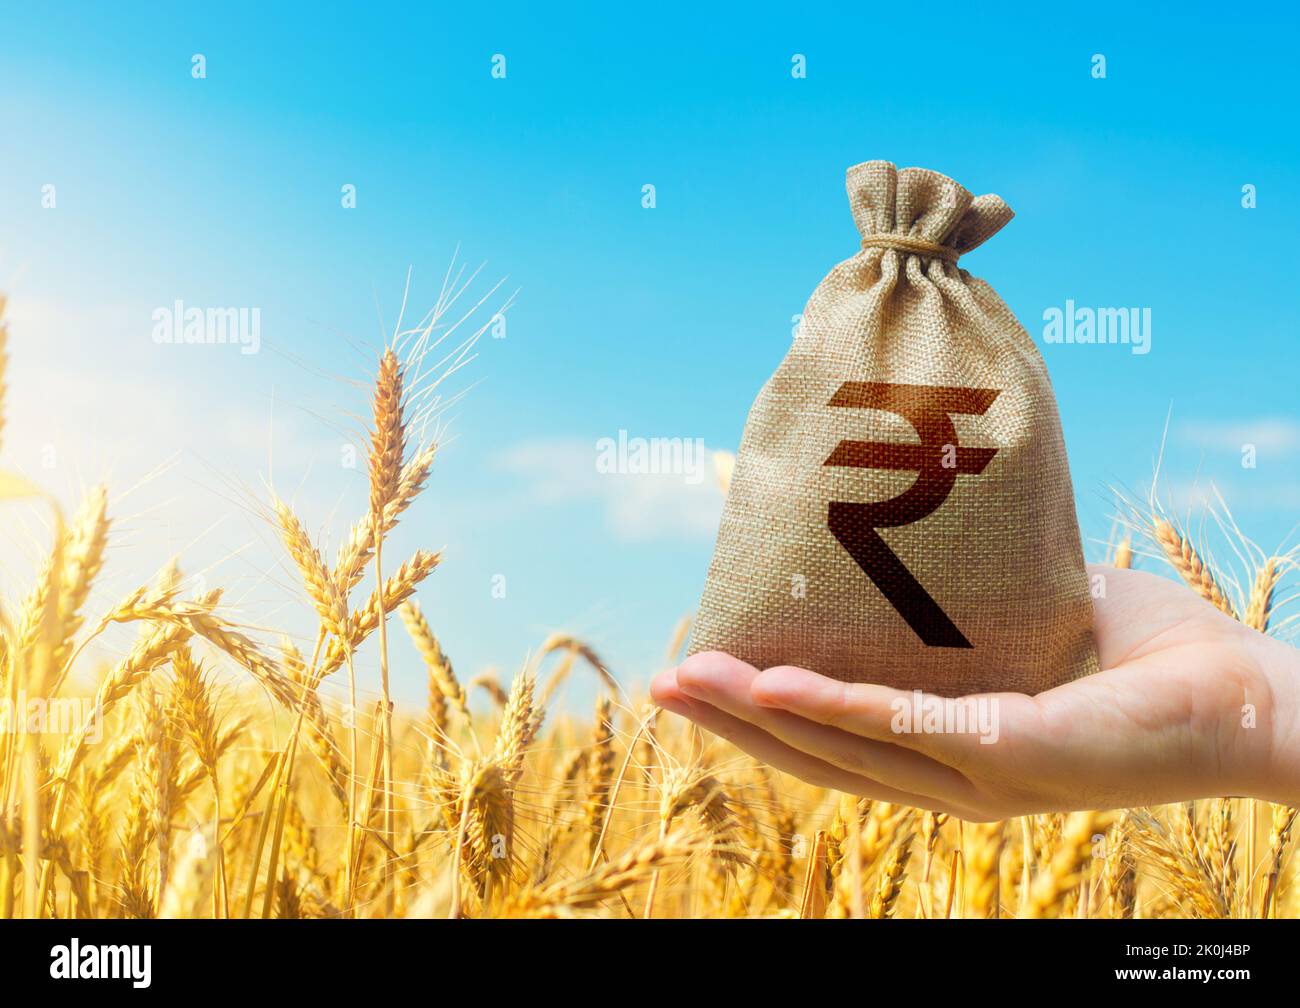 Wheat field and indian rupee money bag. Agroindustry and the agricultural business. World hunger. World food security crisis, high prices. Grains defi Stock Photo